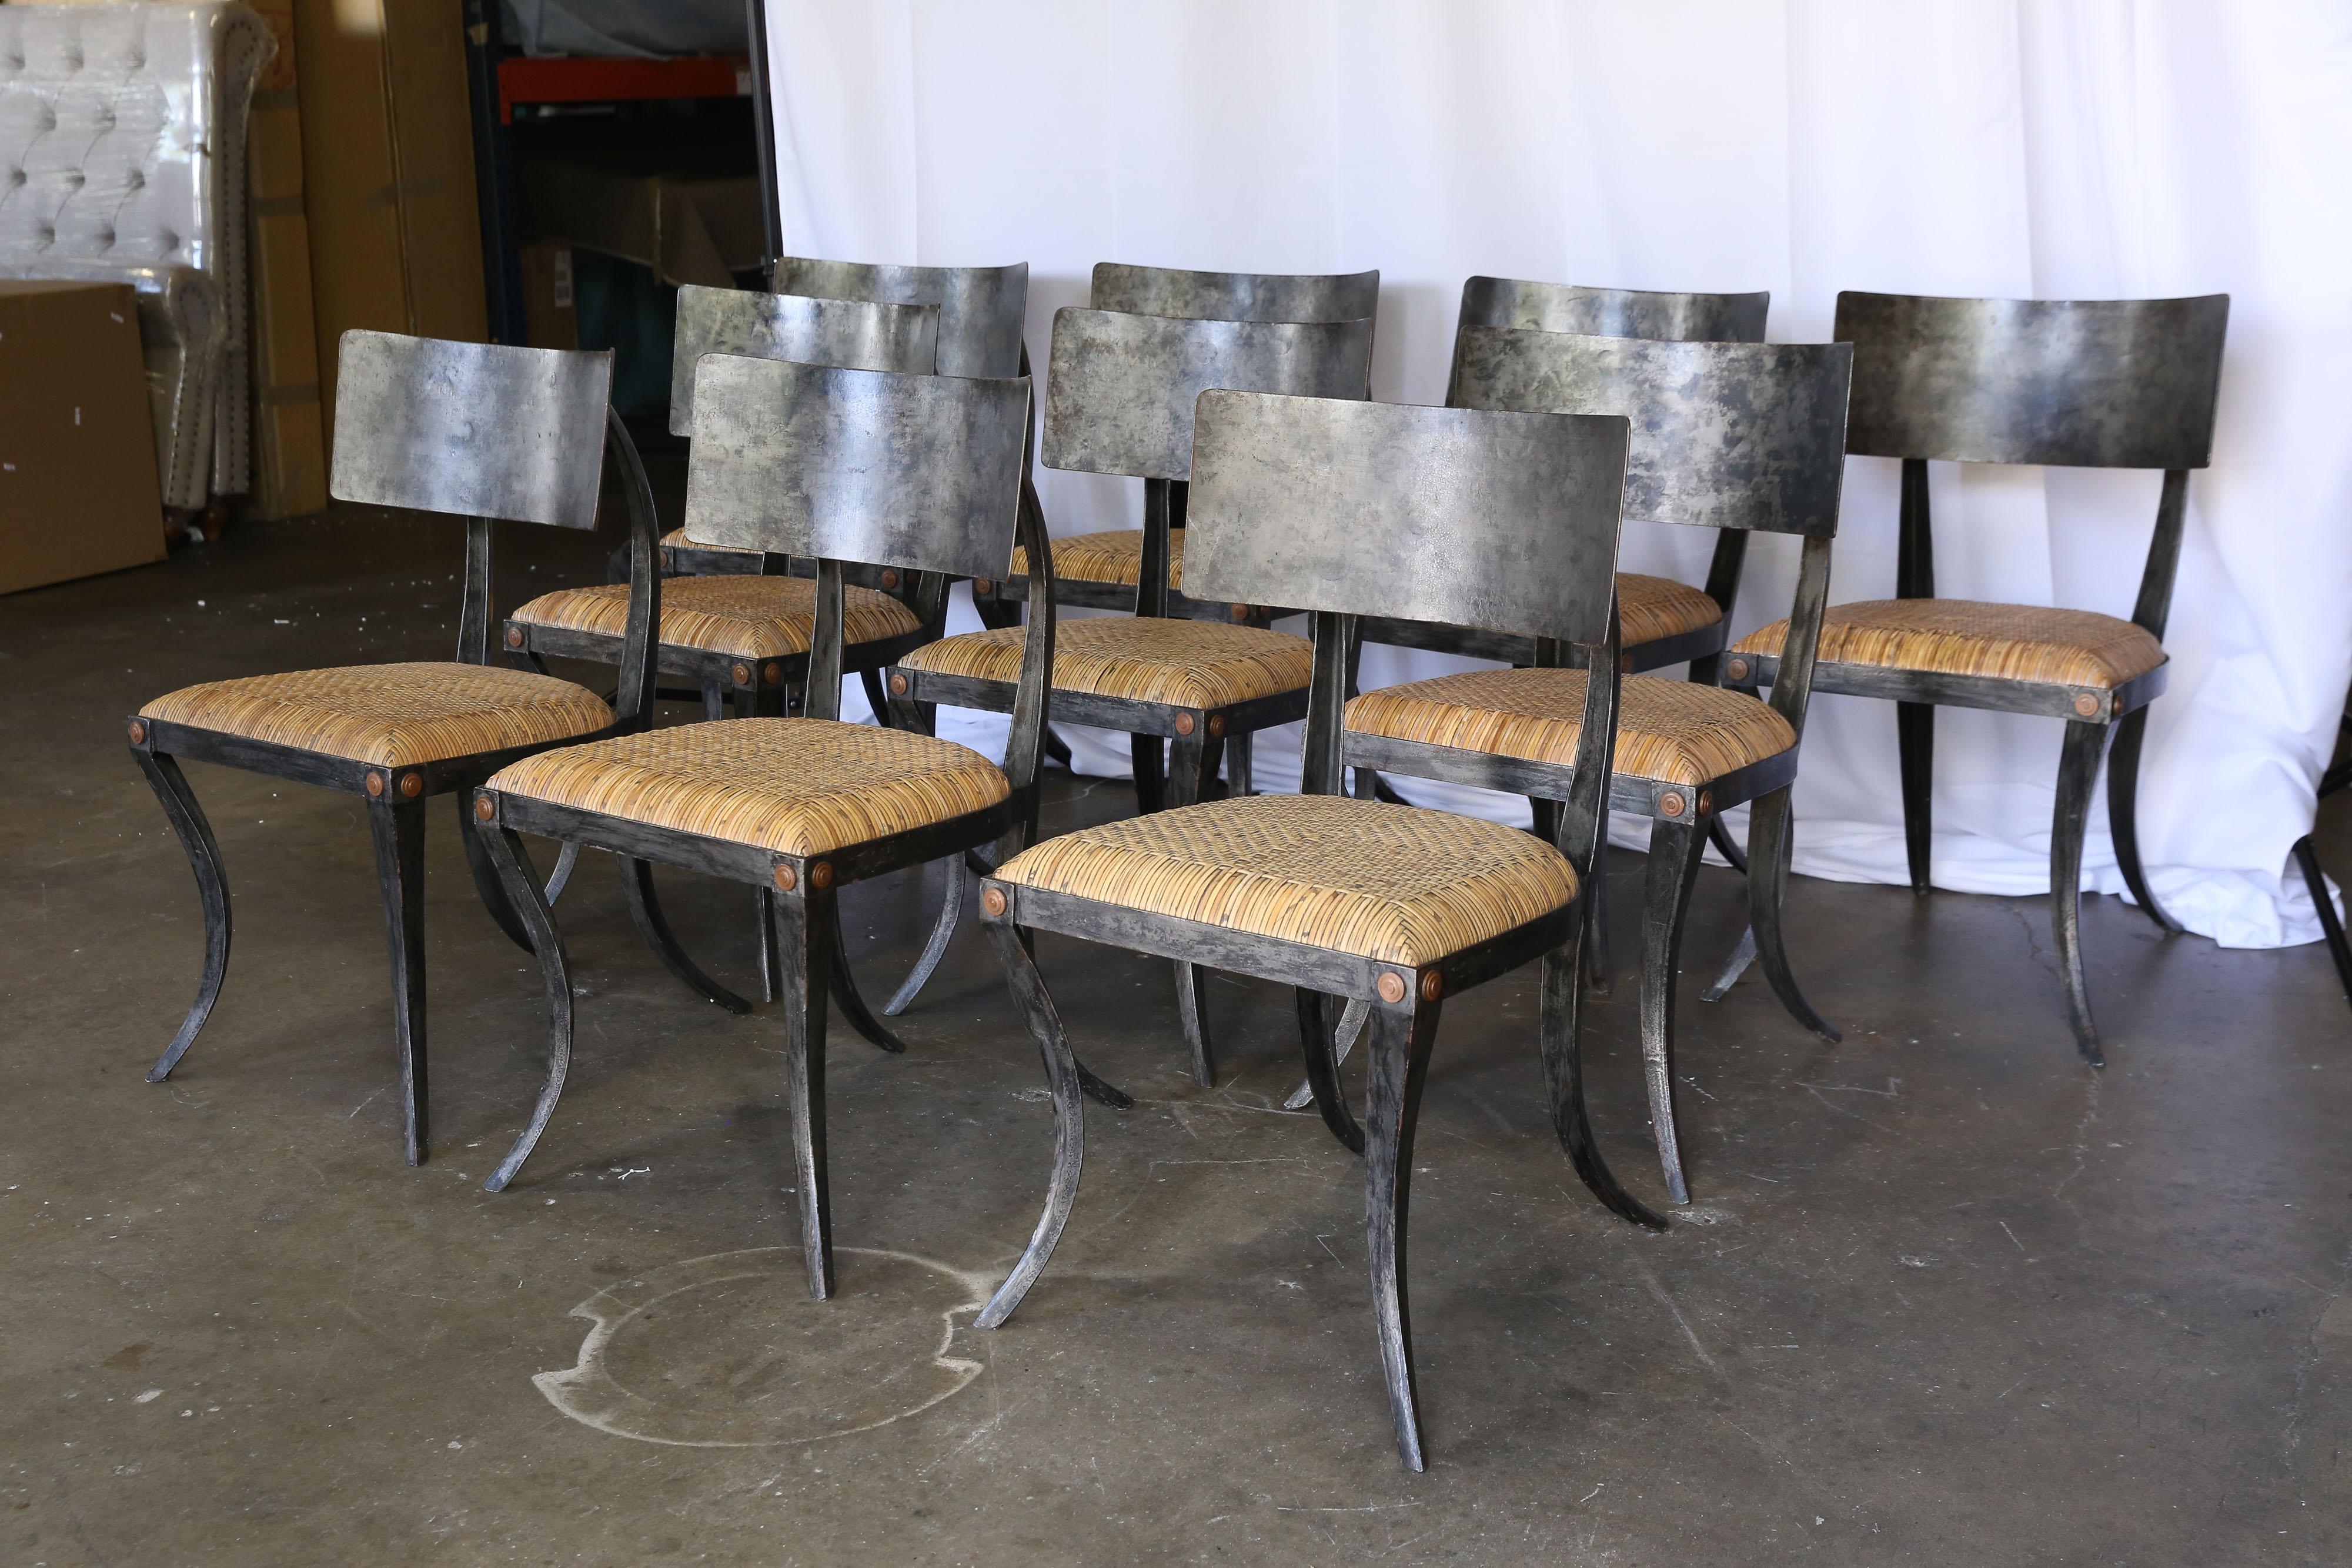 Set of 10 metal Klismos chairs by Ched Berenguer-Topacio with woven rattan seats. Patinated wrought iron with brass details at front legs. Excellent condition and very comfortable. Measures: Seat depth 16.5